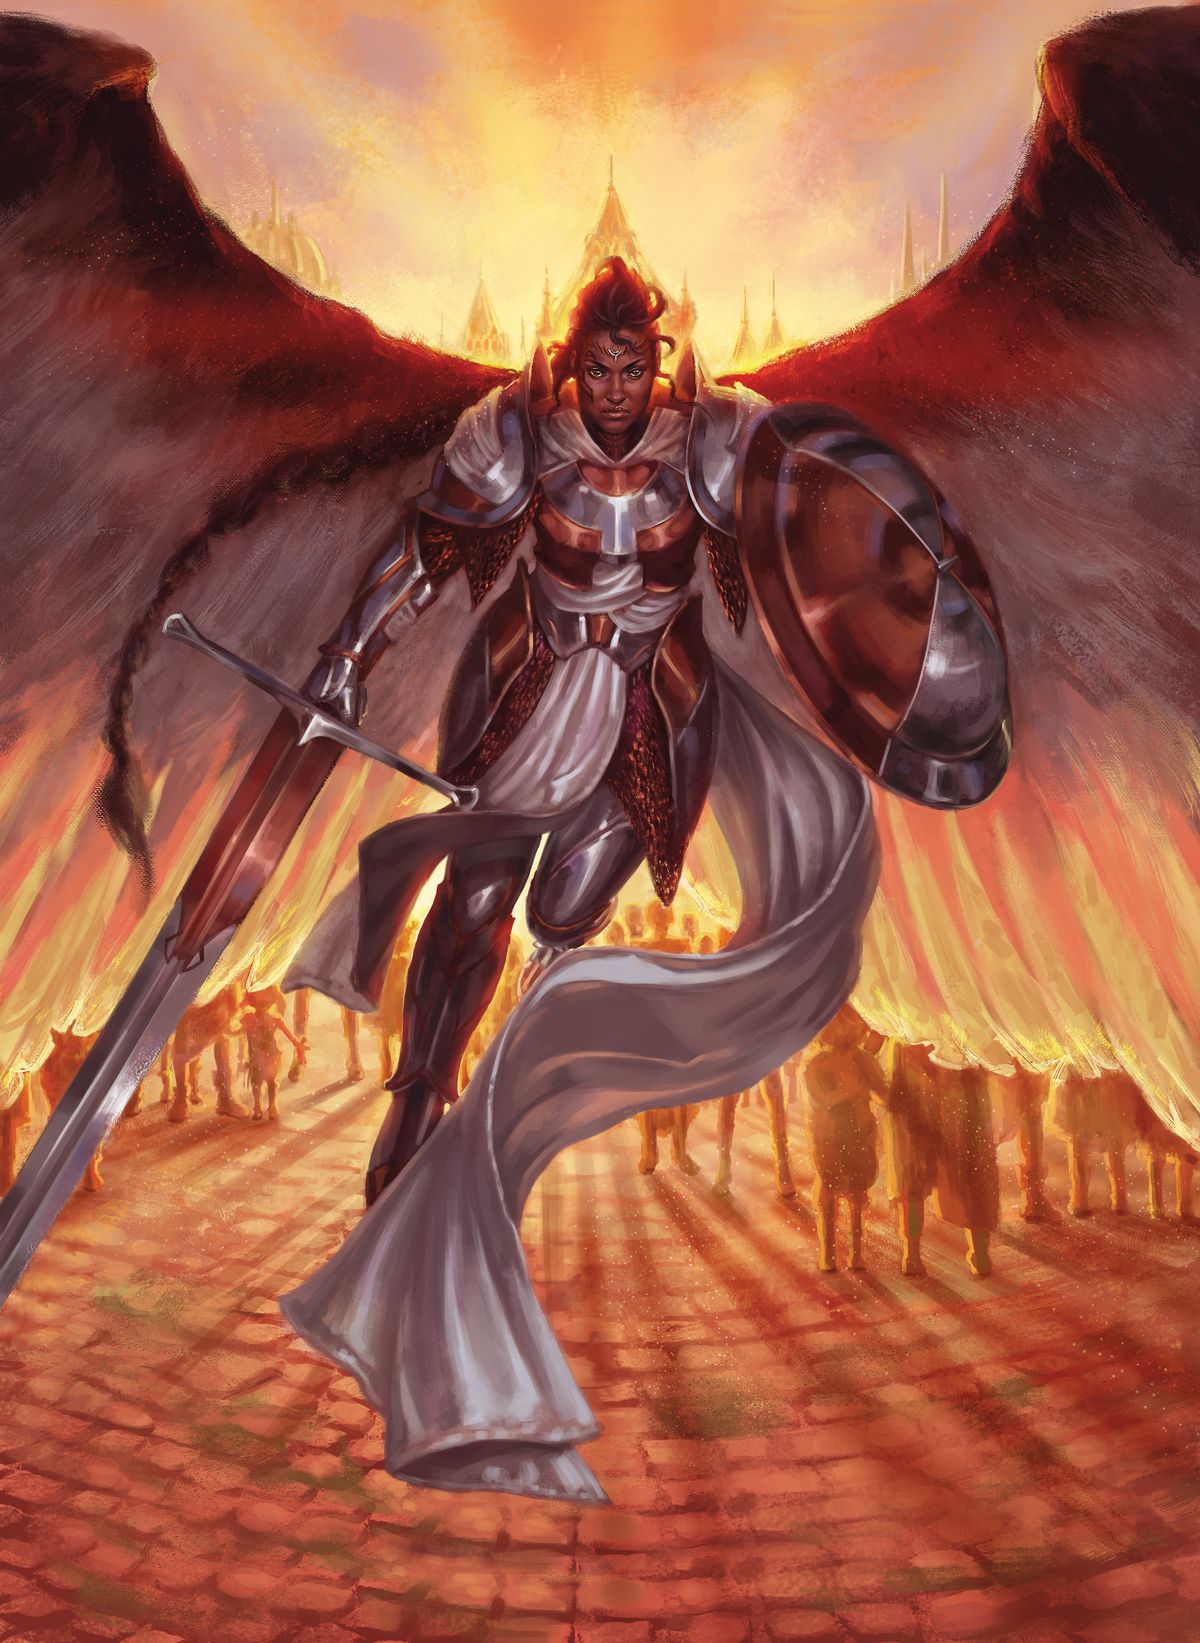 A Black angel, a massive sword in her right hand. Her wings are spread before a golden city.